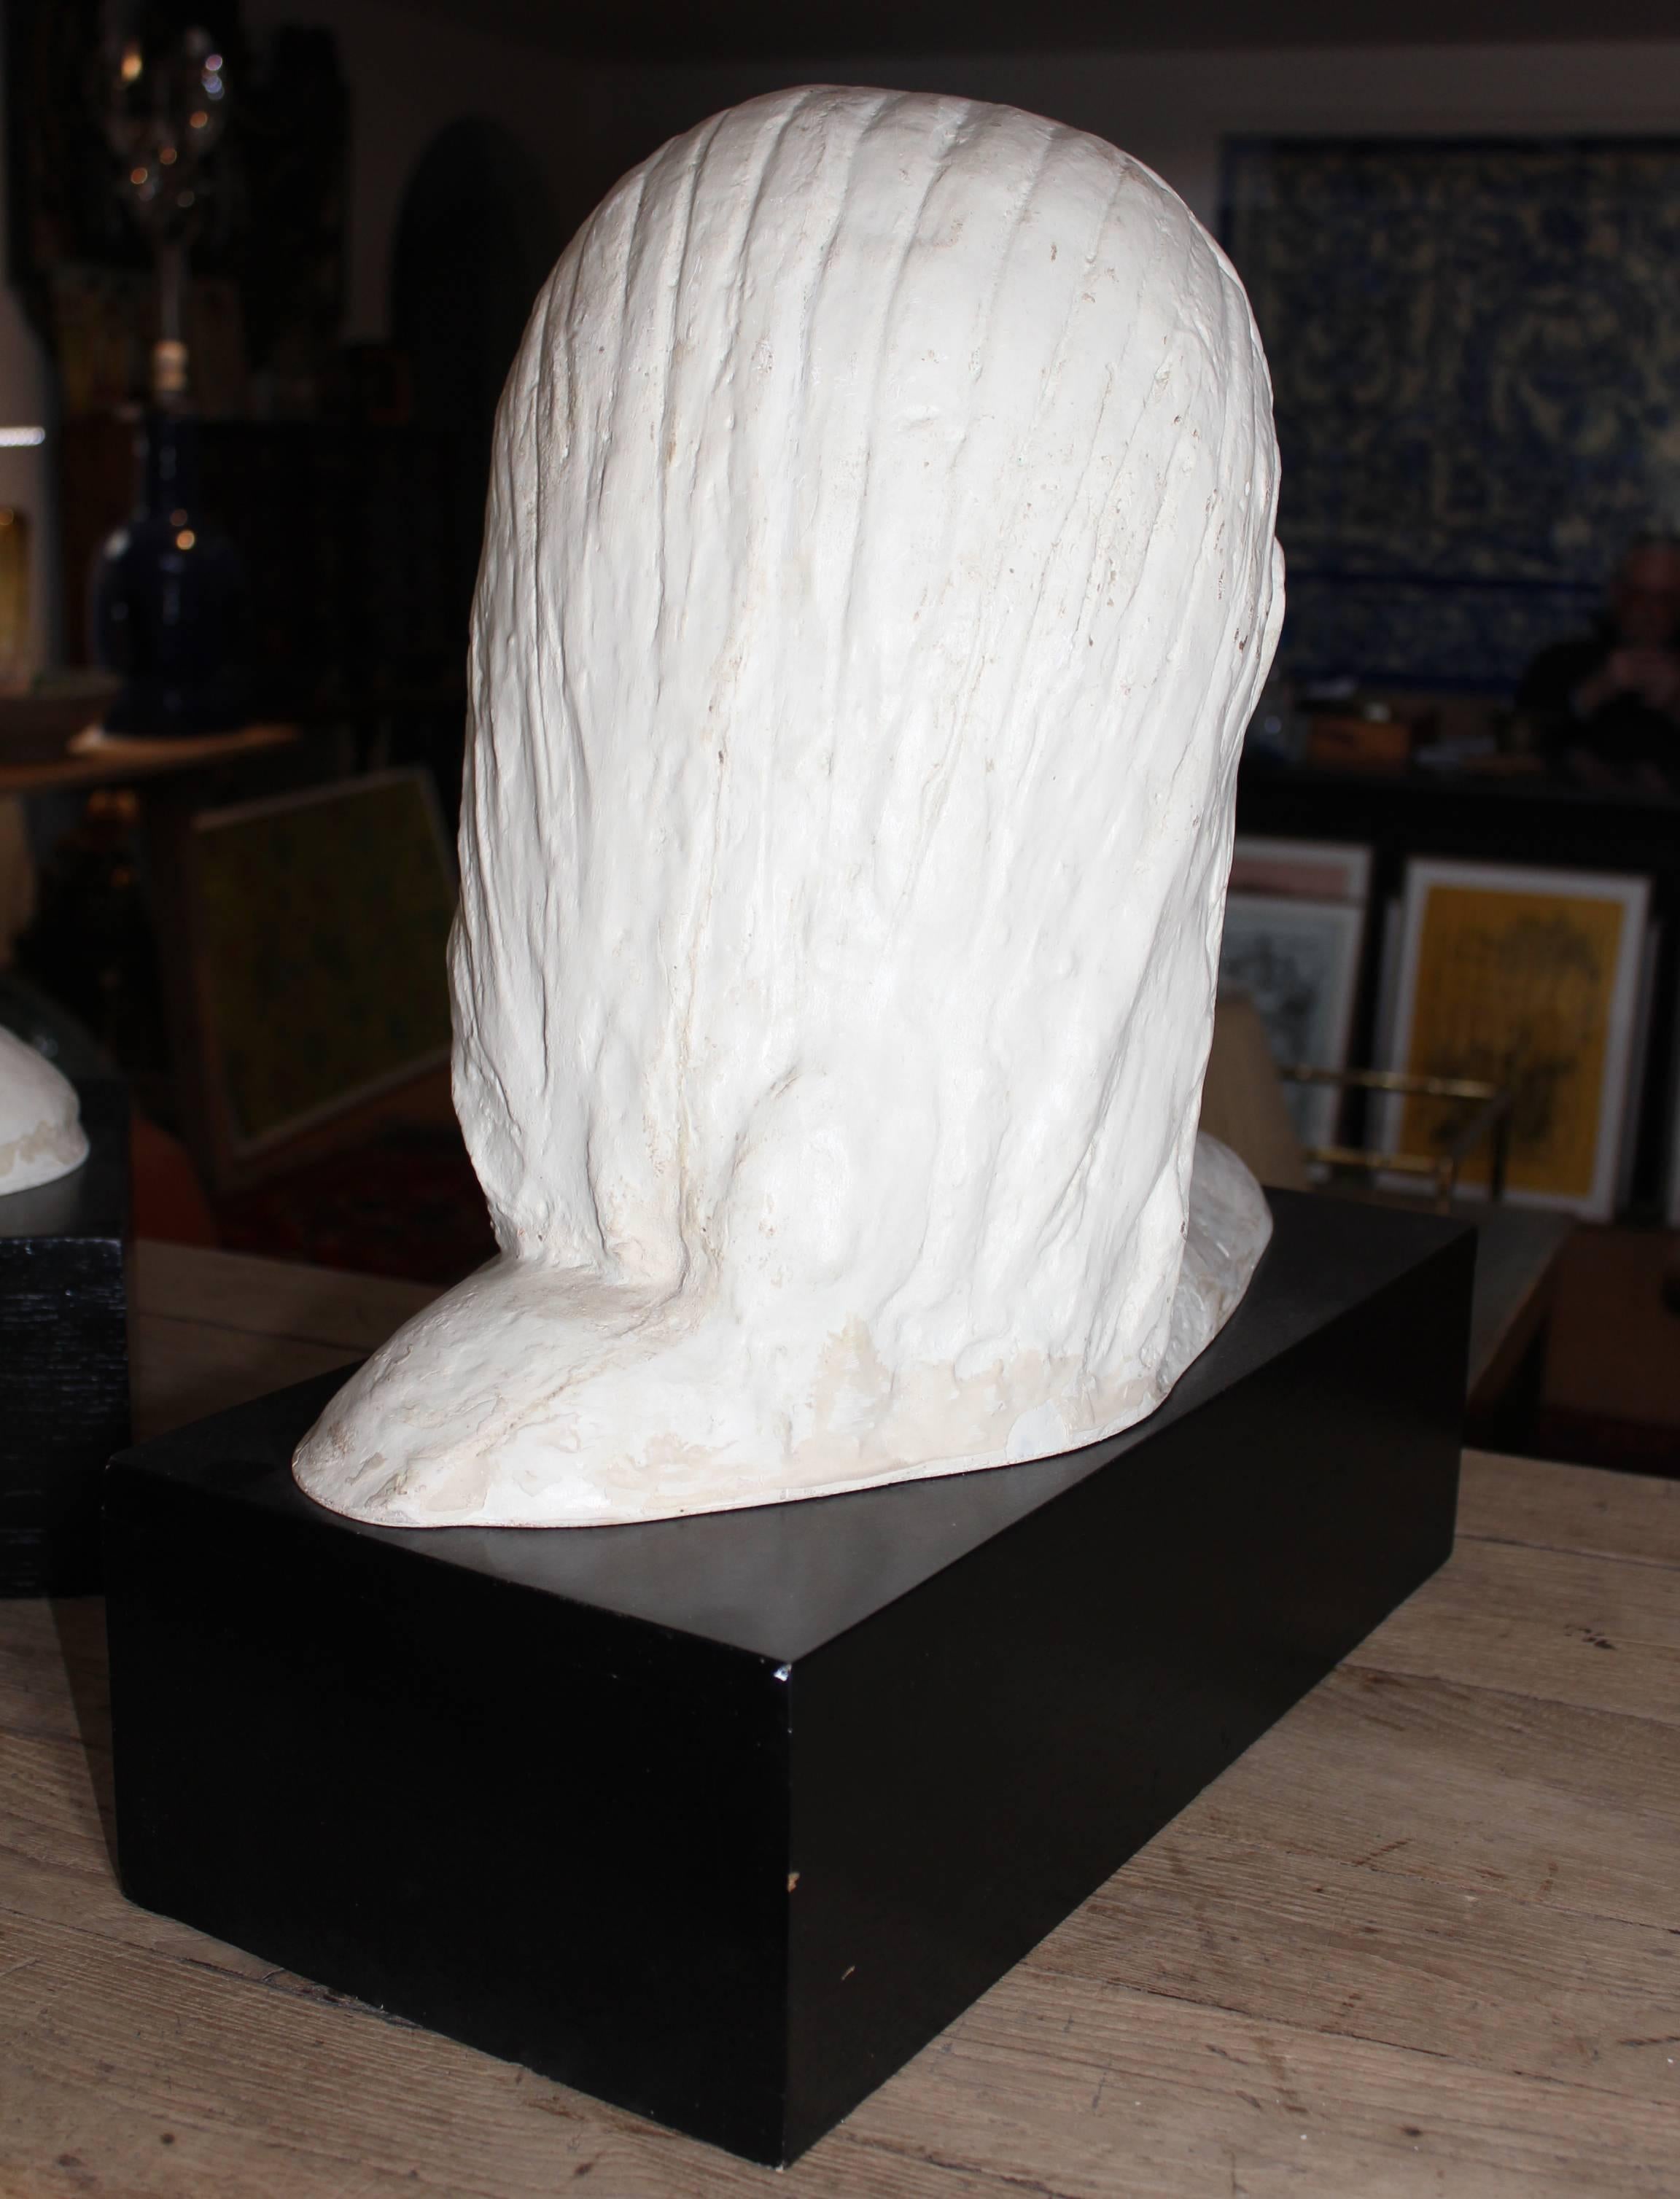 20th Century Pair of Resin African Busts with Plaster Finish on a Black Wooden Pedestal